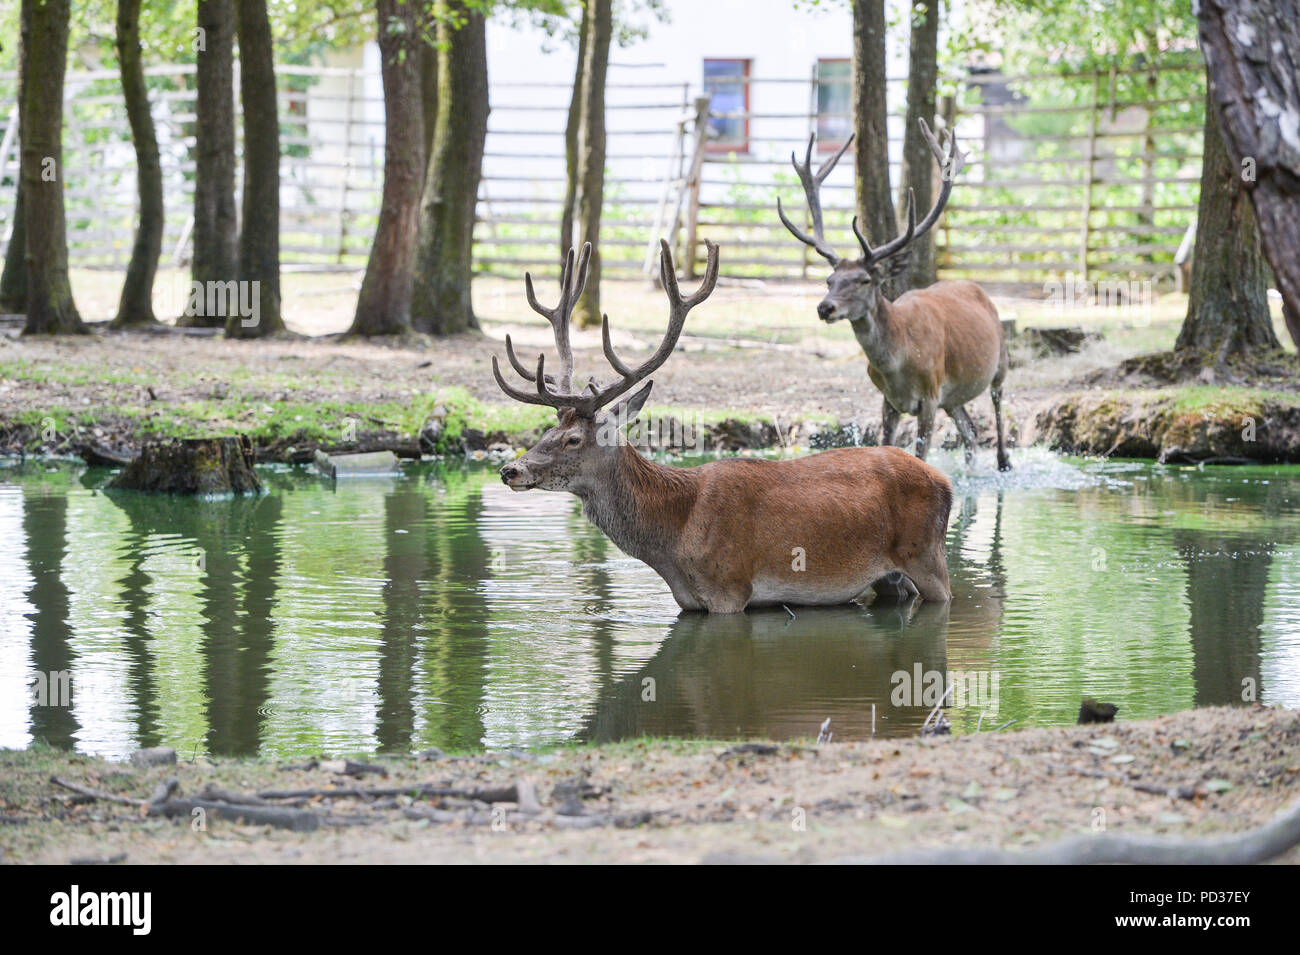 The series of tropical days continues in the Czech Republic with temperatures of up to 38 degrees Centigrade and the Red deer cools itself by Skalice near Ceska Lipa, Northern Bohemia, Czech Republic, on August 4, 2018. (CTK Photo/Vit Cerny) Stock Photo